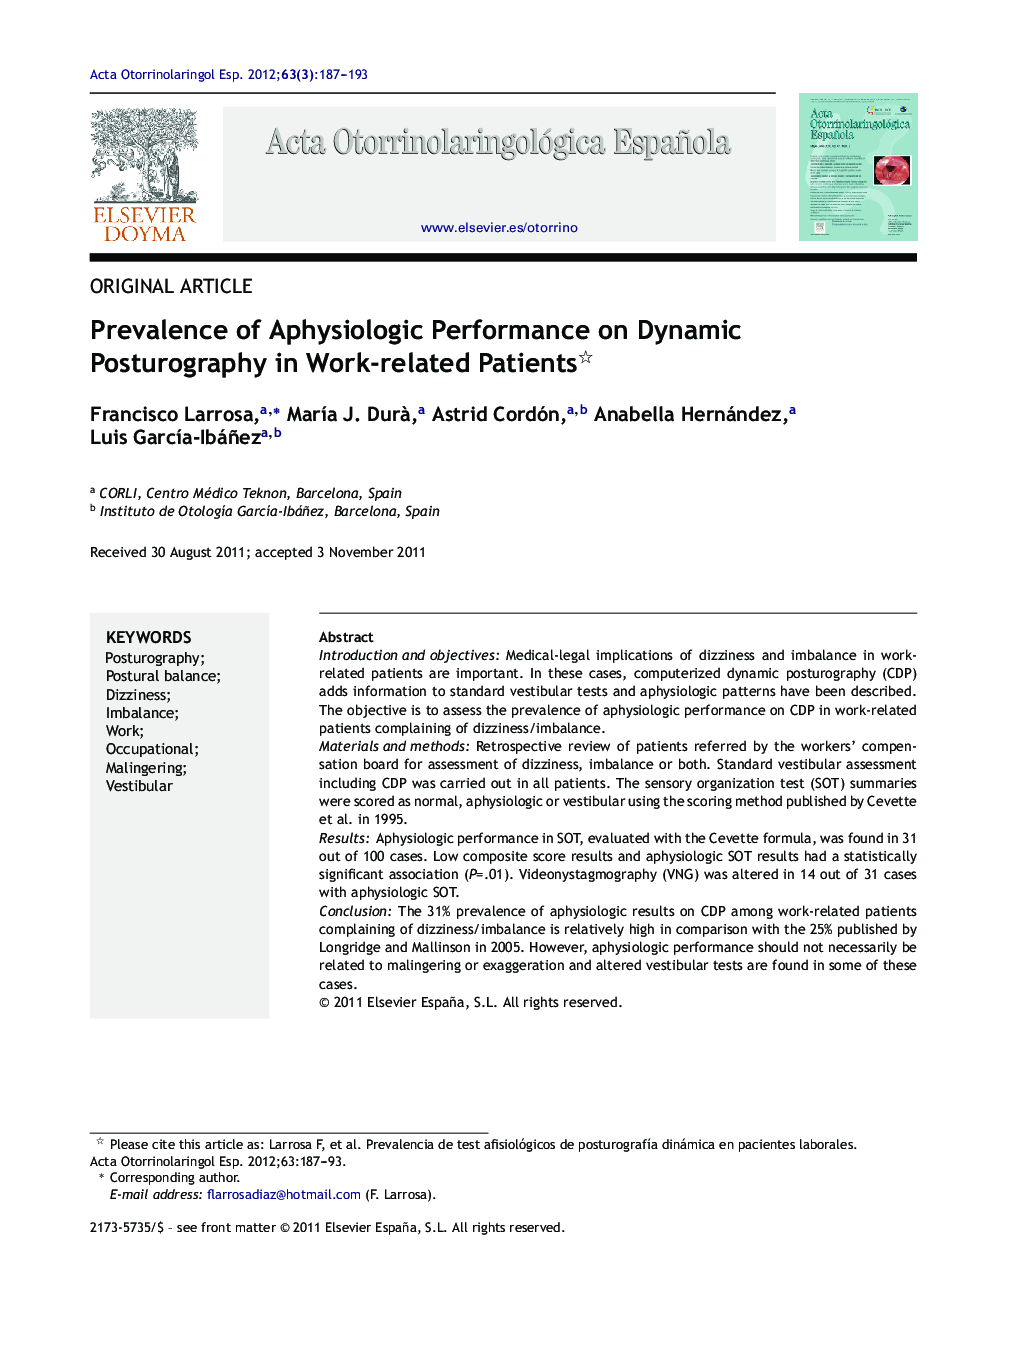 Prevalence of Aphysiologic Performance on Dynamic Posturography in Work-related Patients 